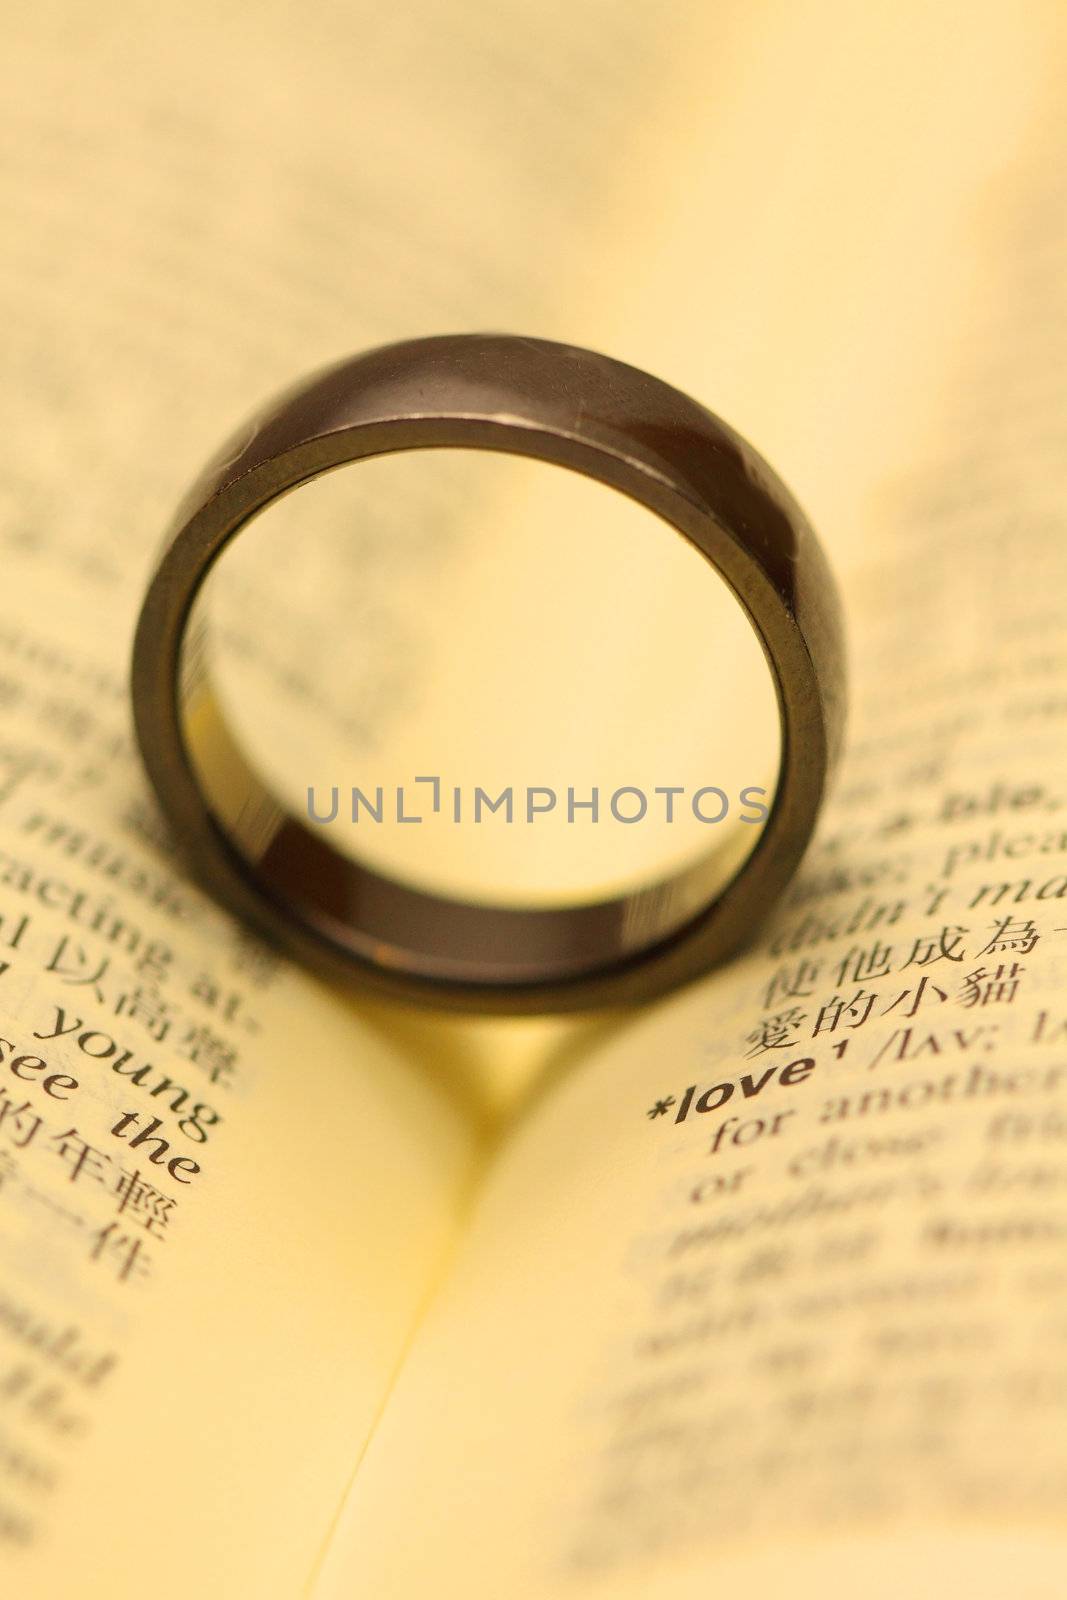 Love in all around: a ring with a word "LOVE".